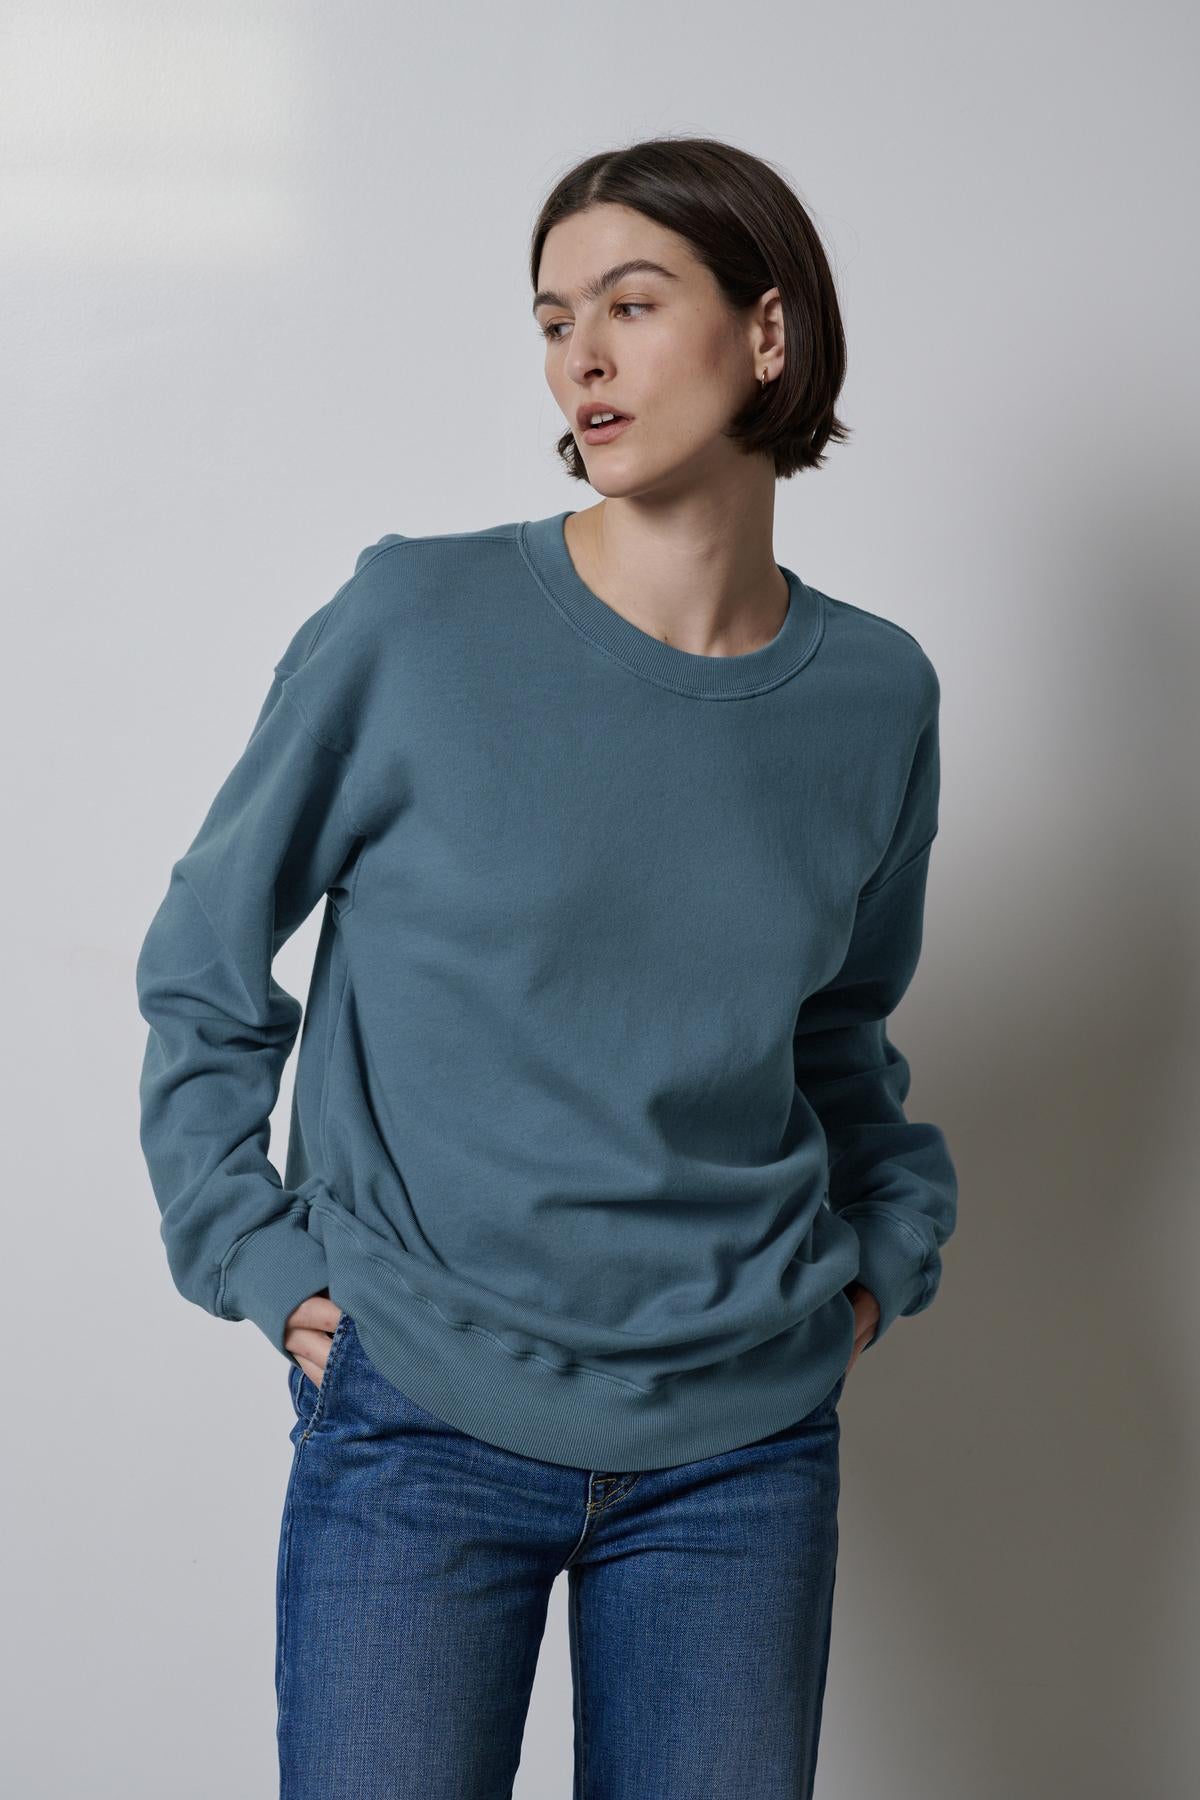 The model is wearing the Velvet by Jenny Graham Abbot sweatshirt made of organic cotton.-35190150103233